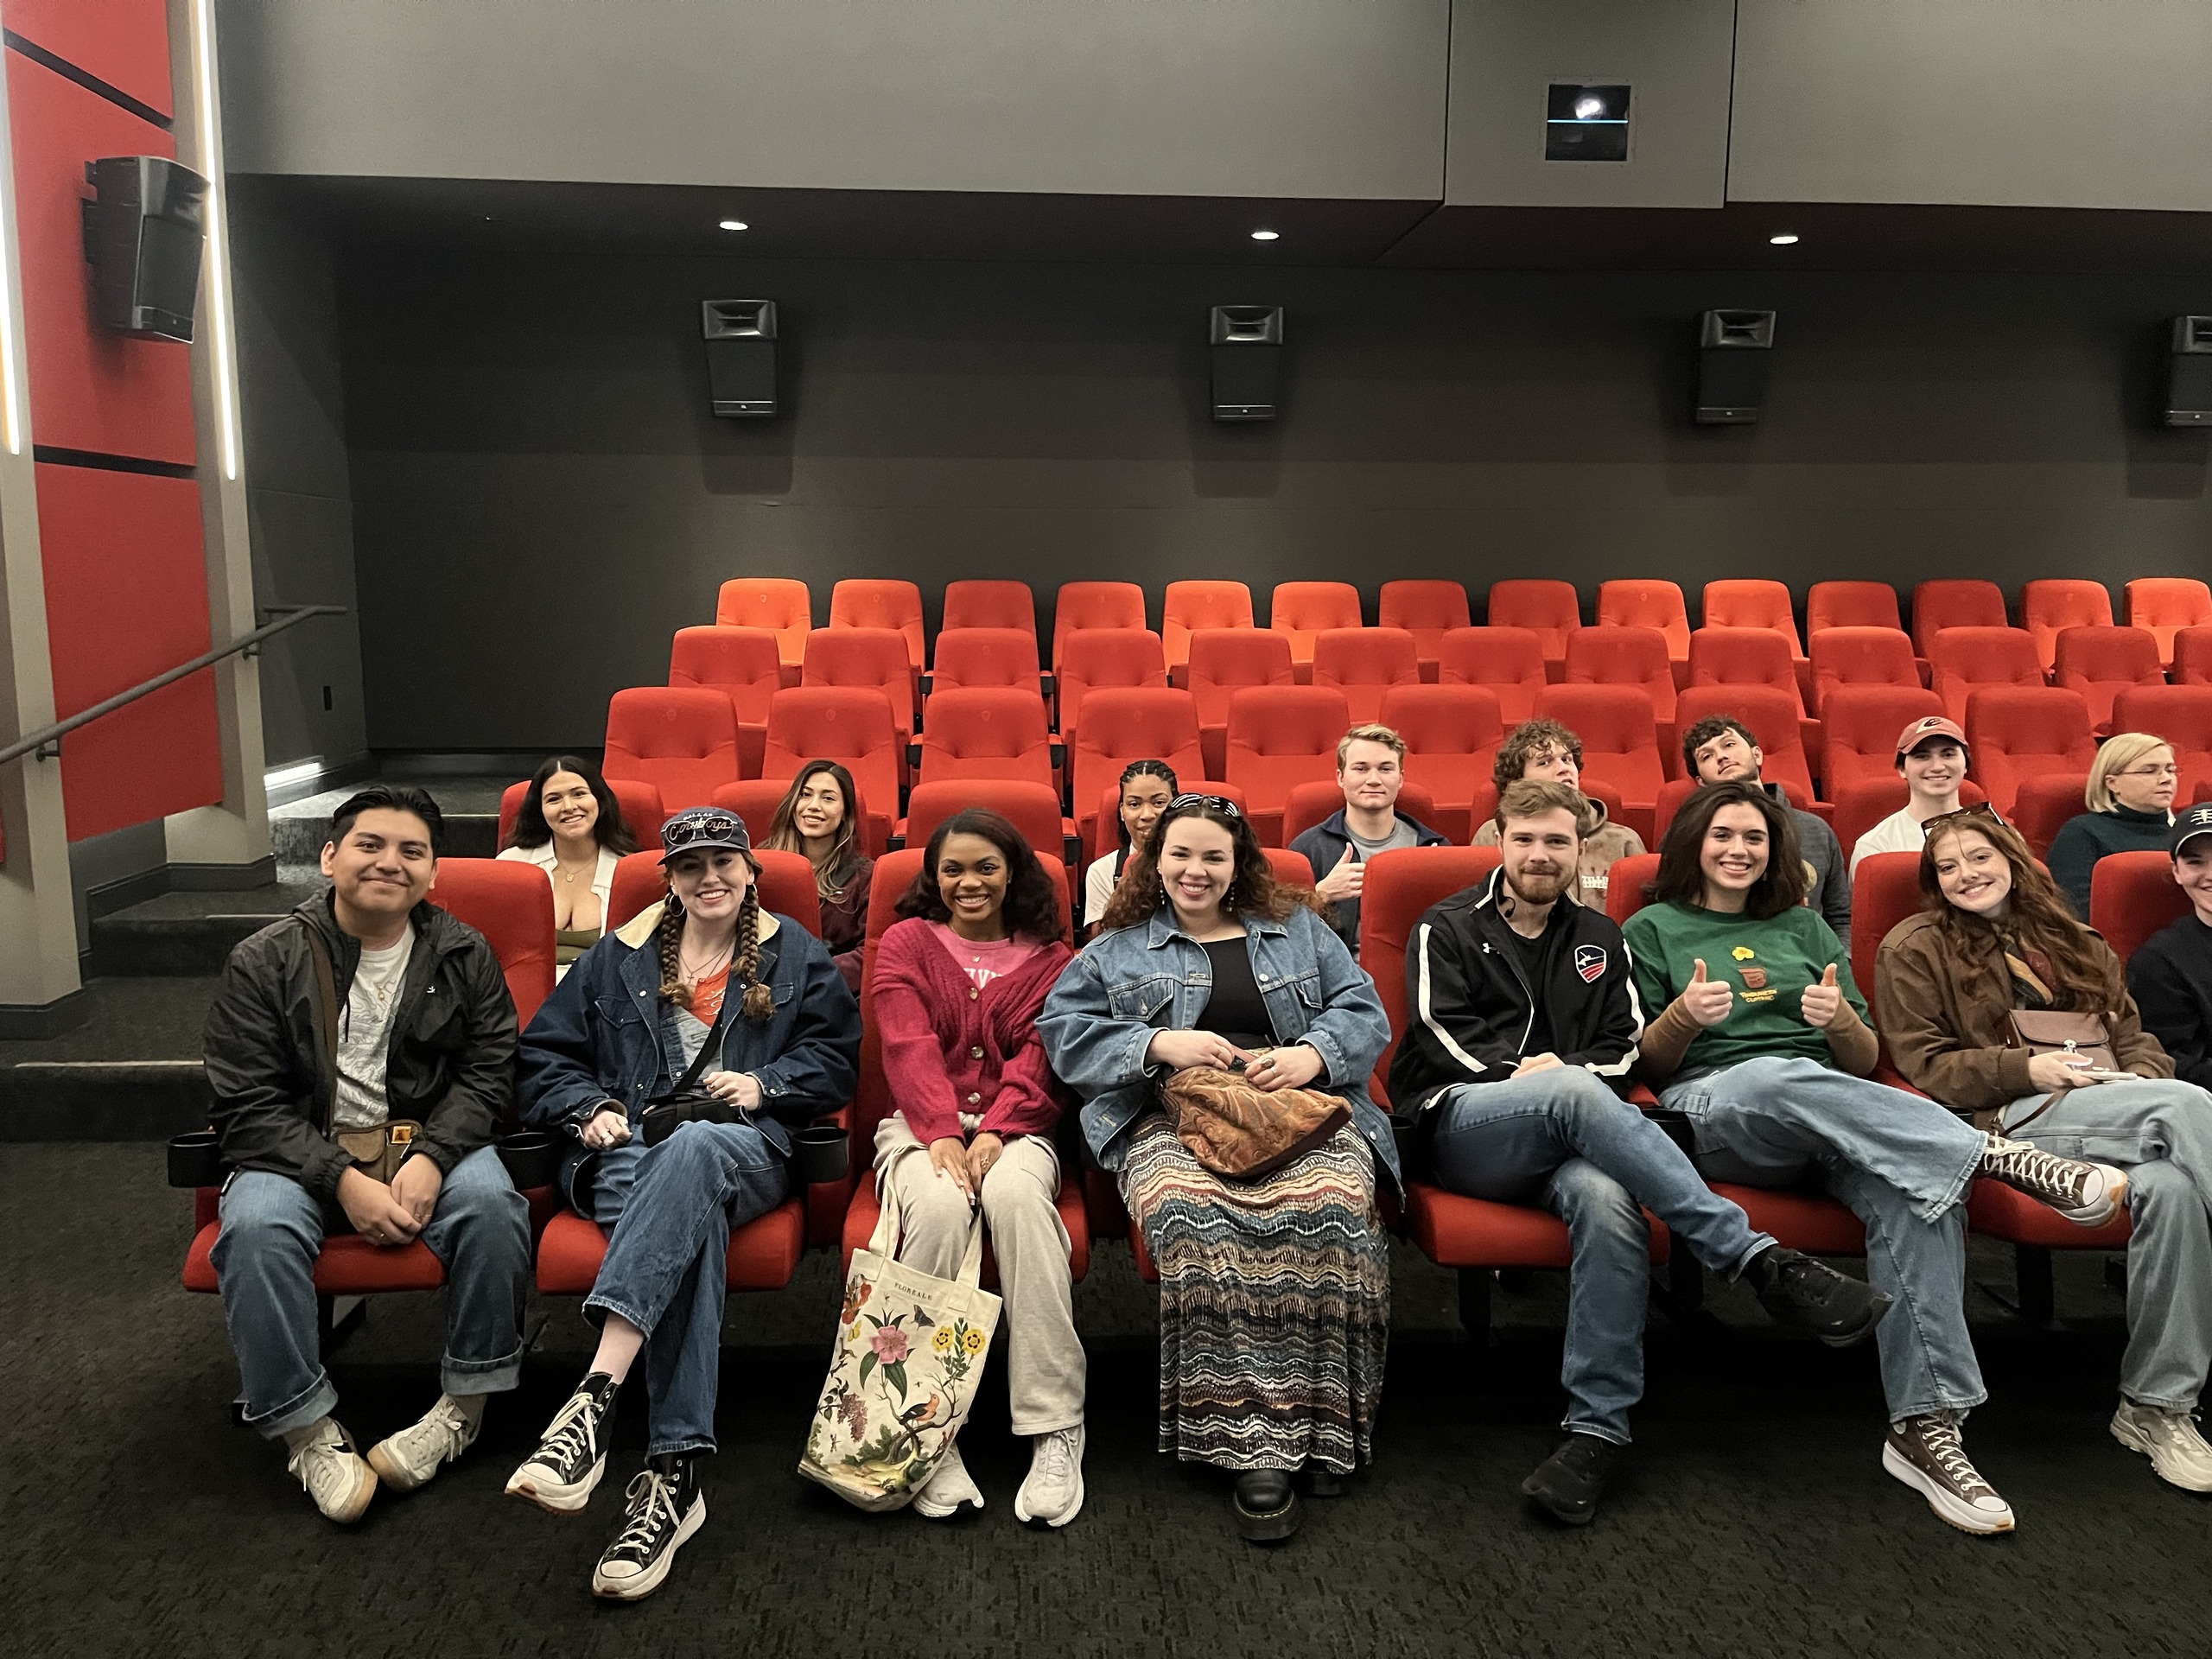 Students group photo in a theater